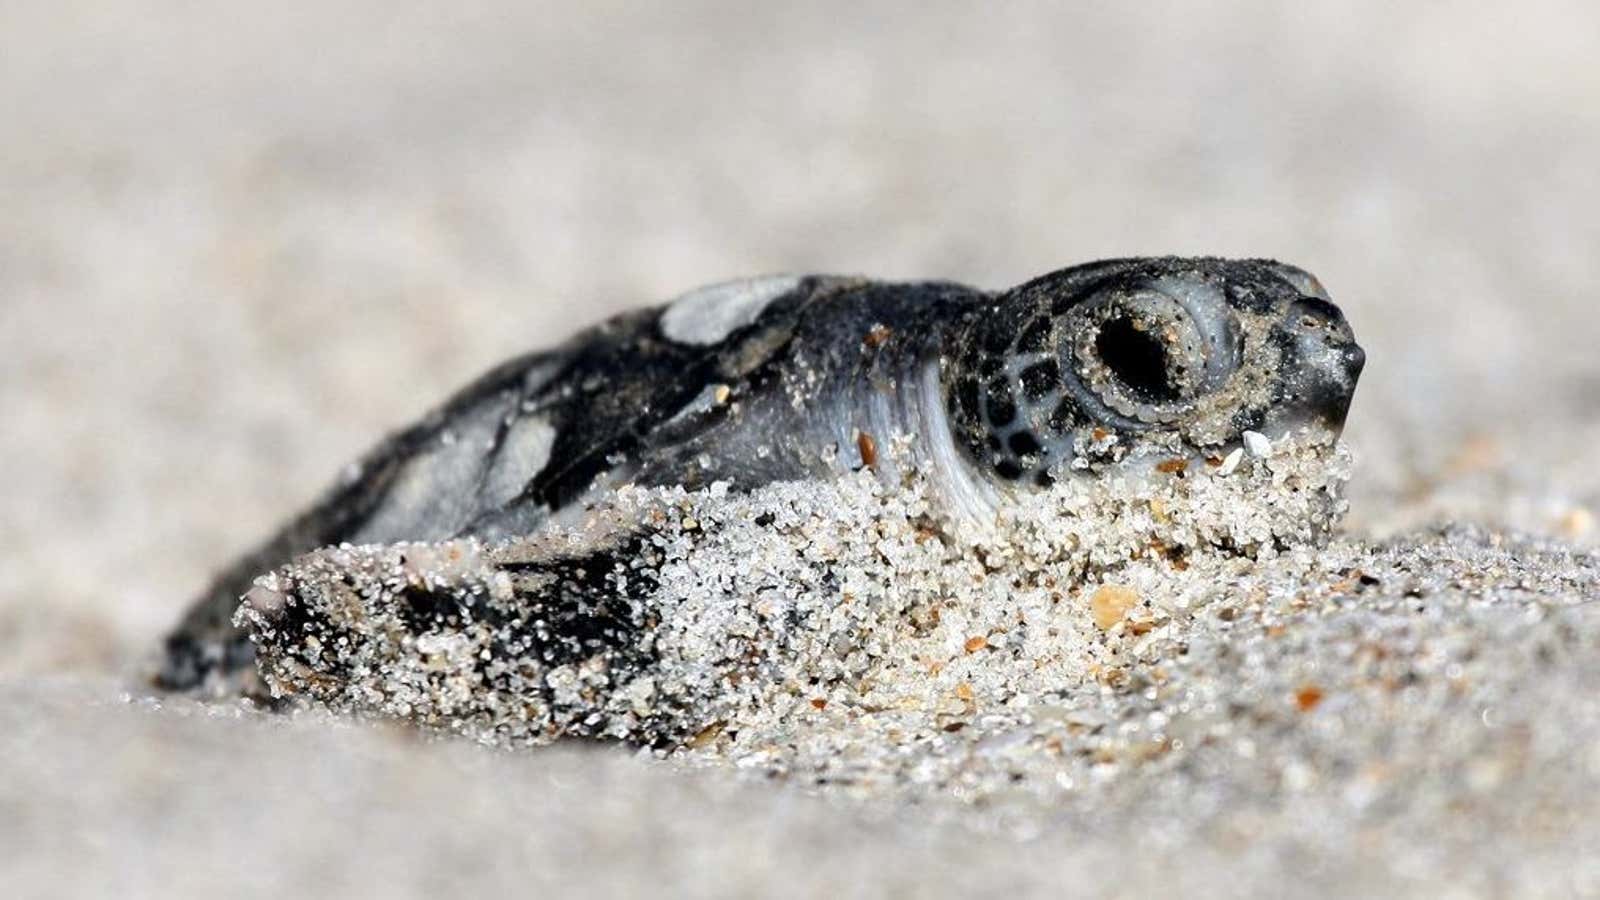 If this baby green sea turtle hasn’t eaten plastic yet, it probably will soon.